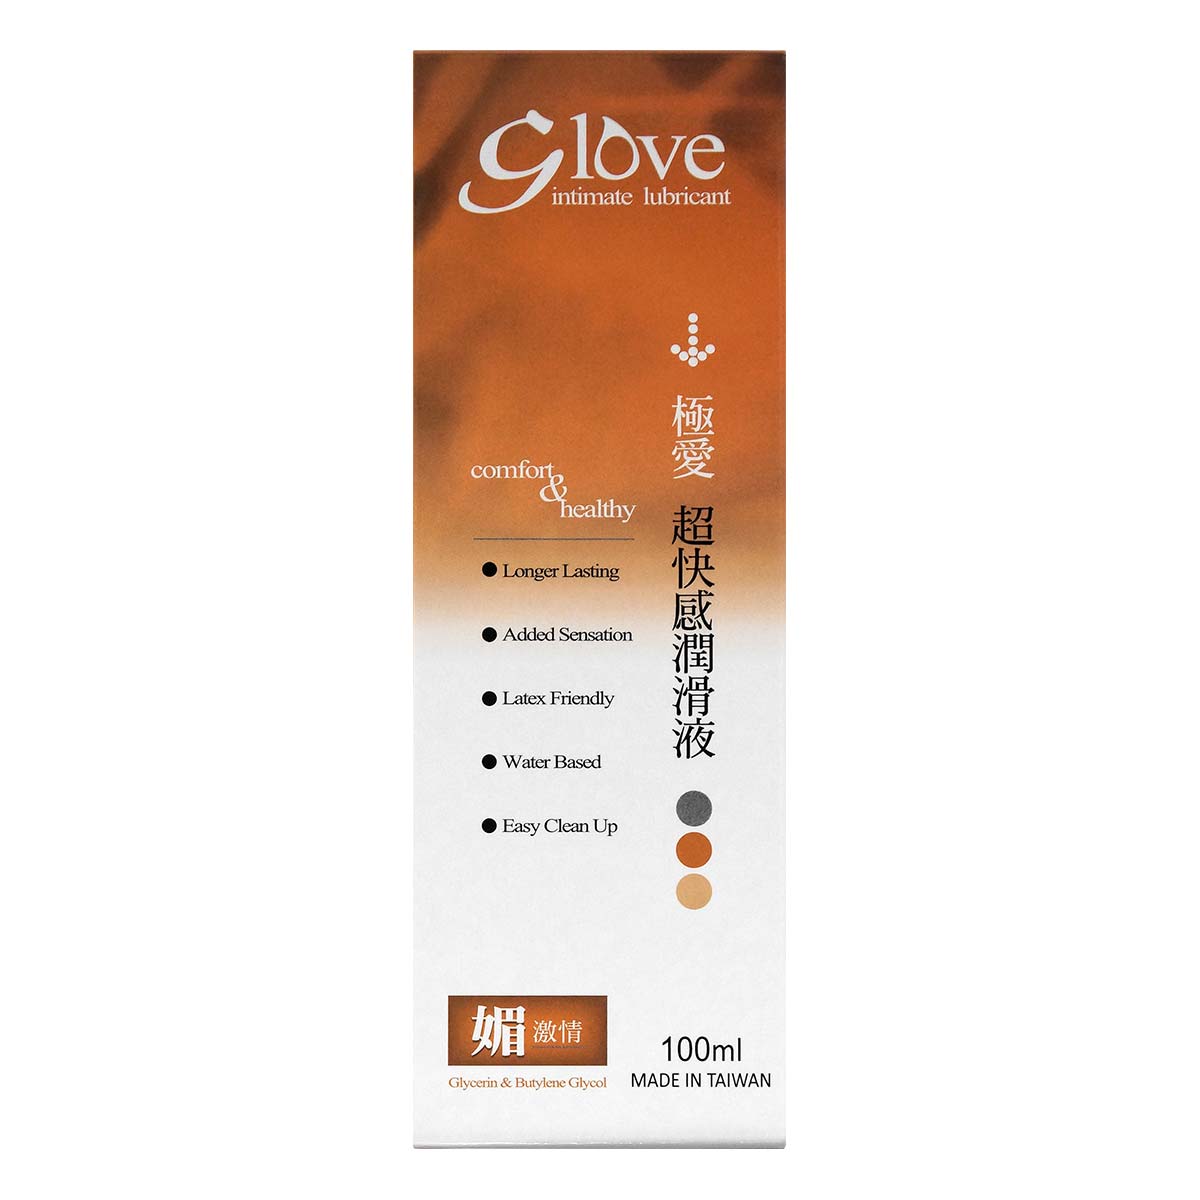 G Love intimate lubricant [Glycerin & Butylene Glycol] 100ml Water-based Lubricant-p_2